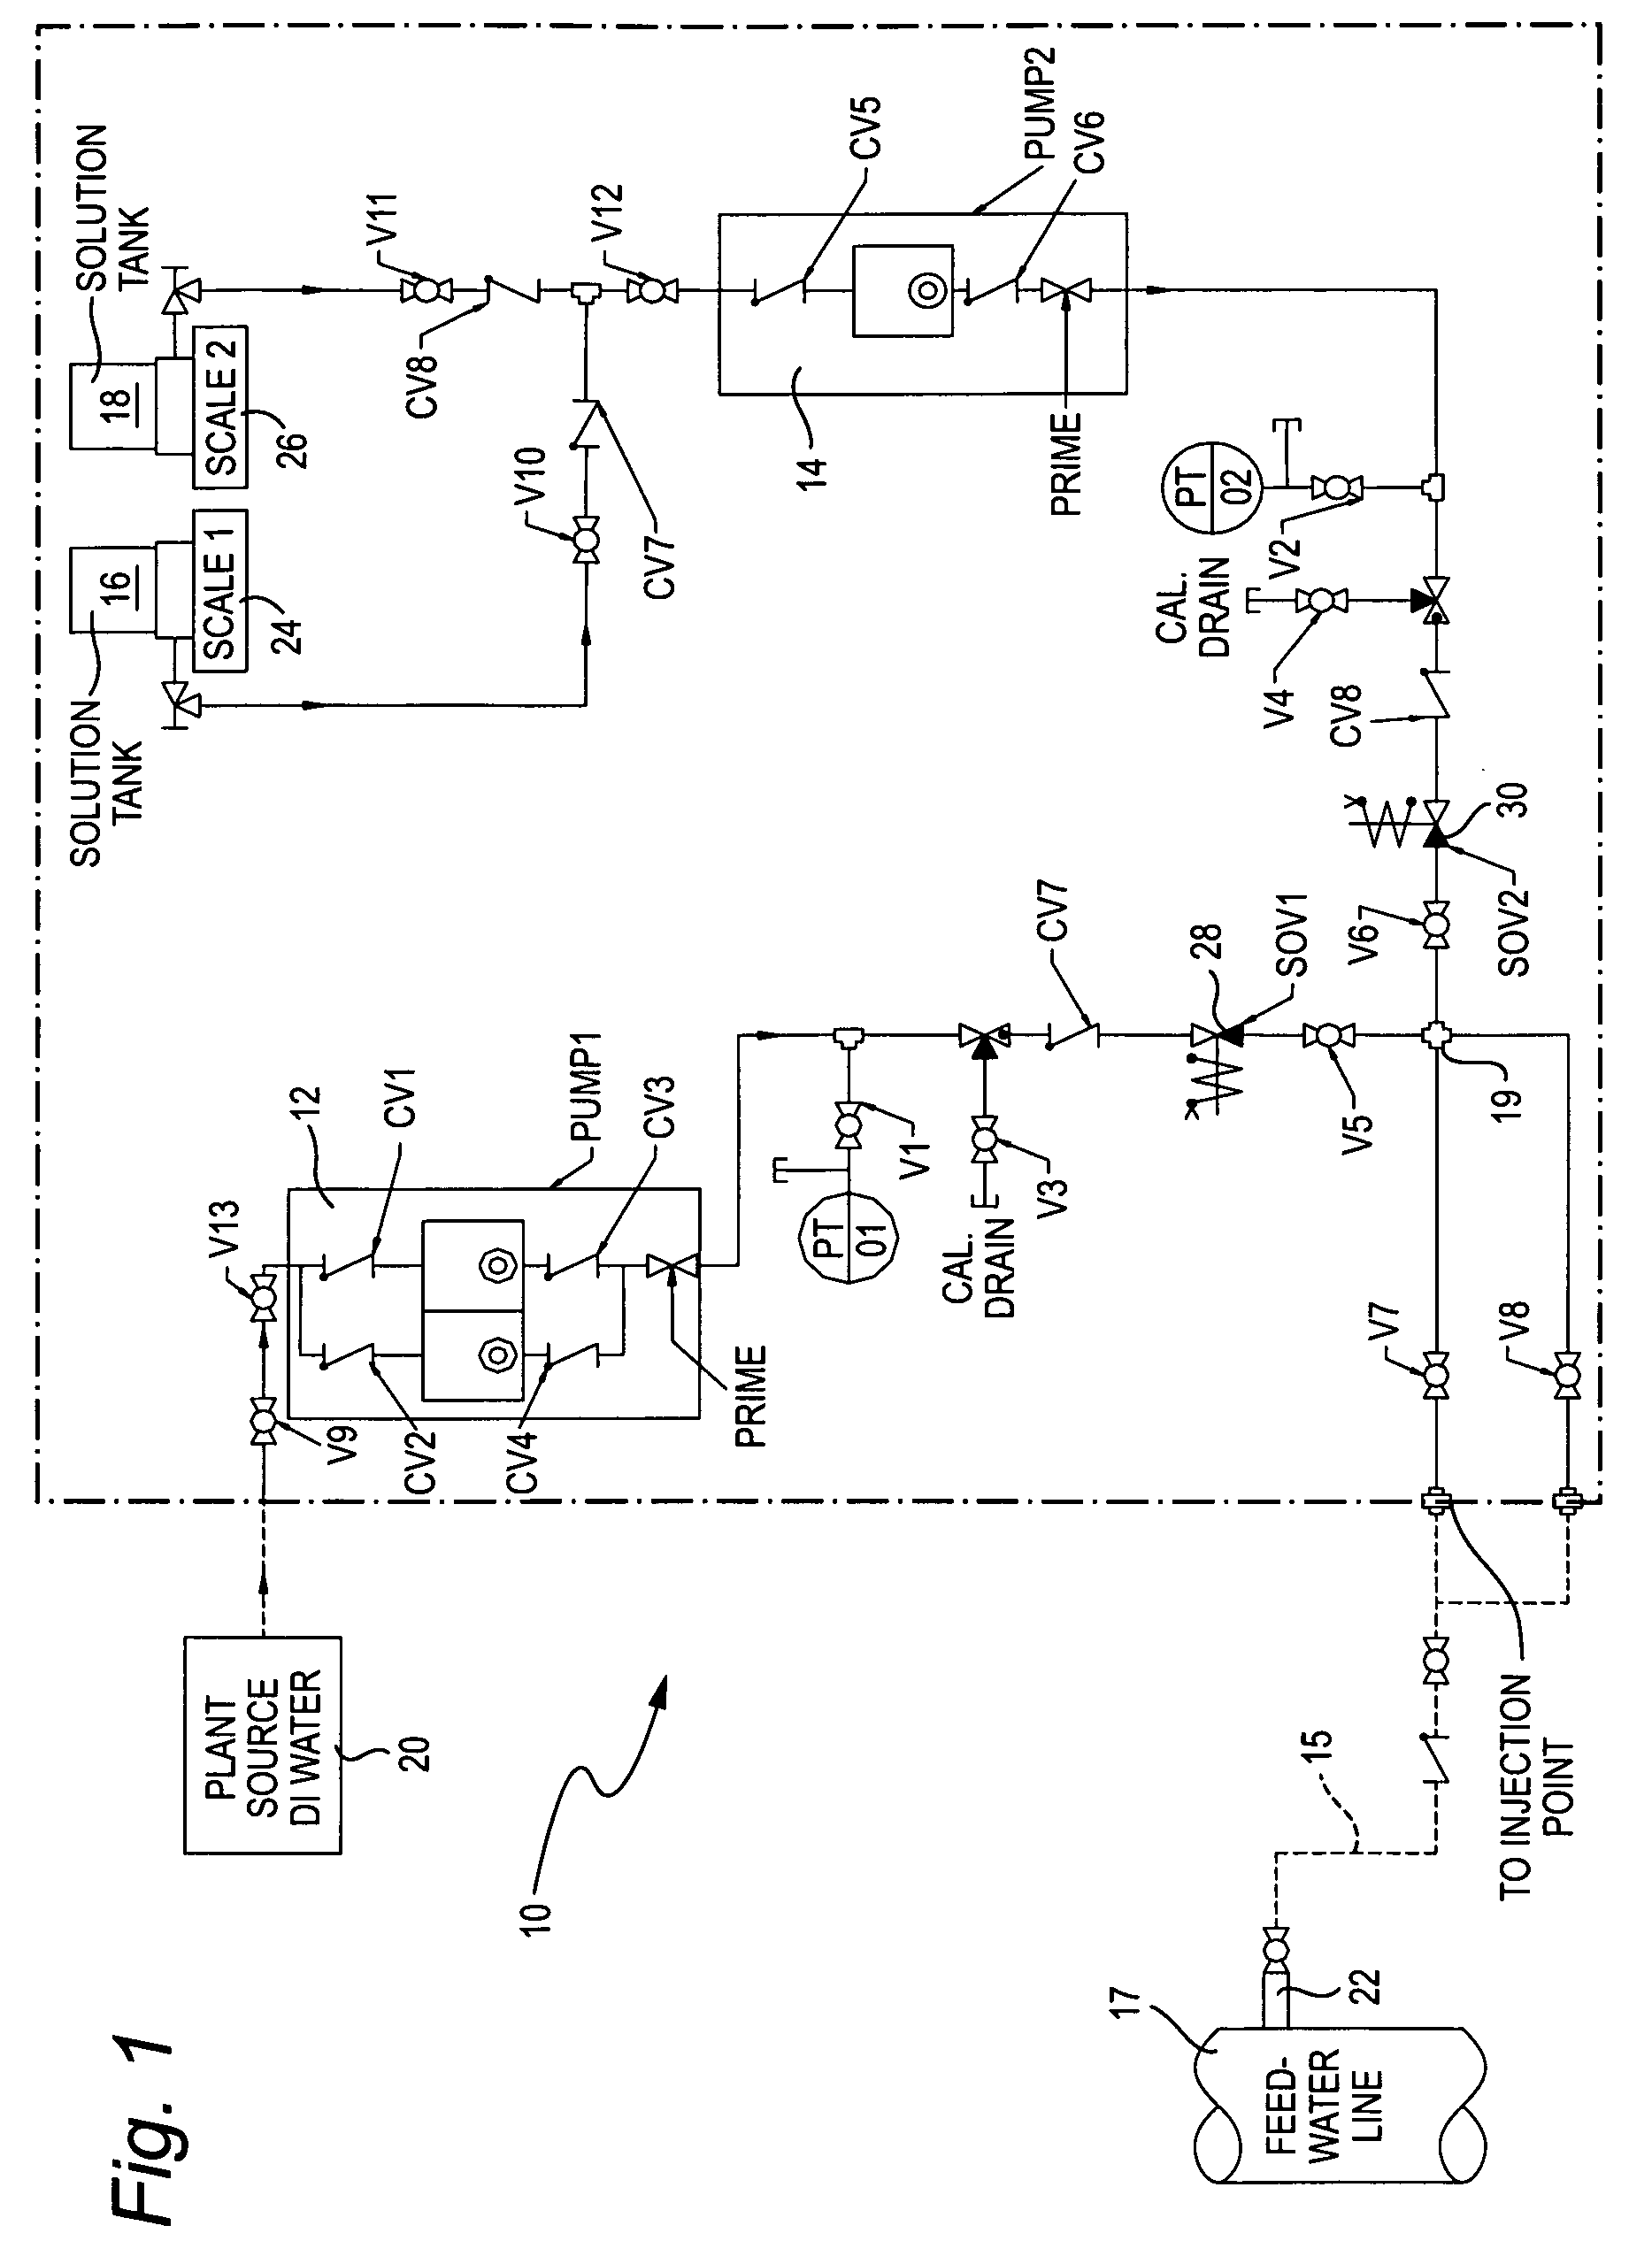 Chemical injection system and chemical delivery process/method of injecting into an operating power reactor